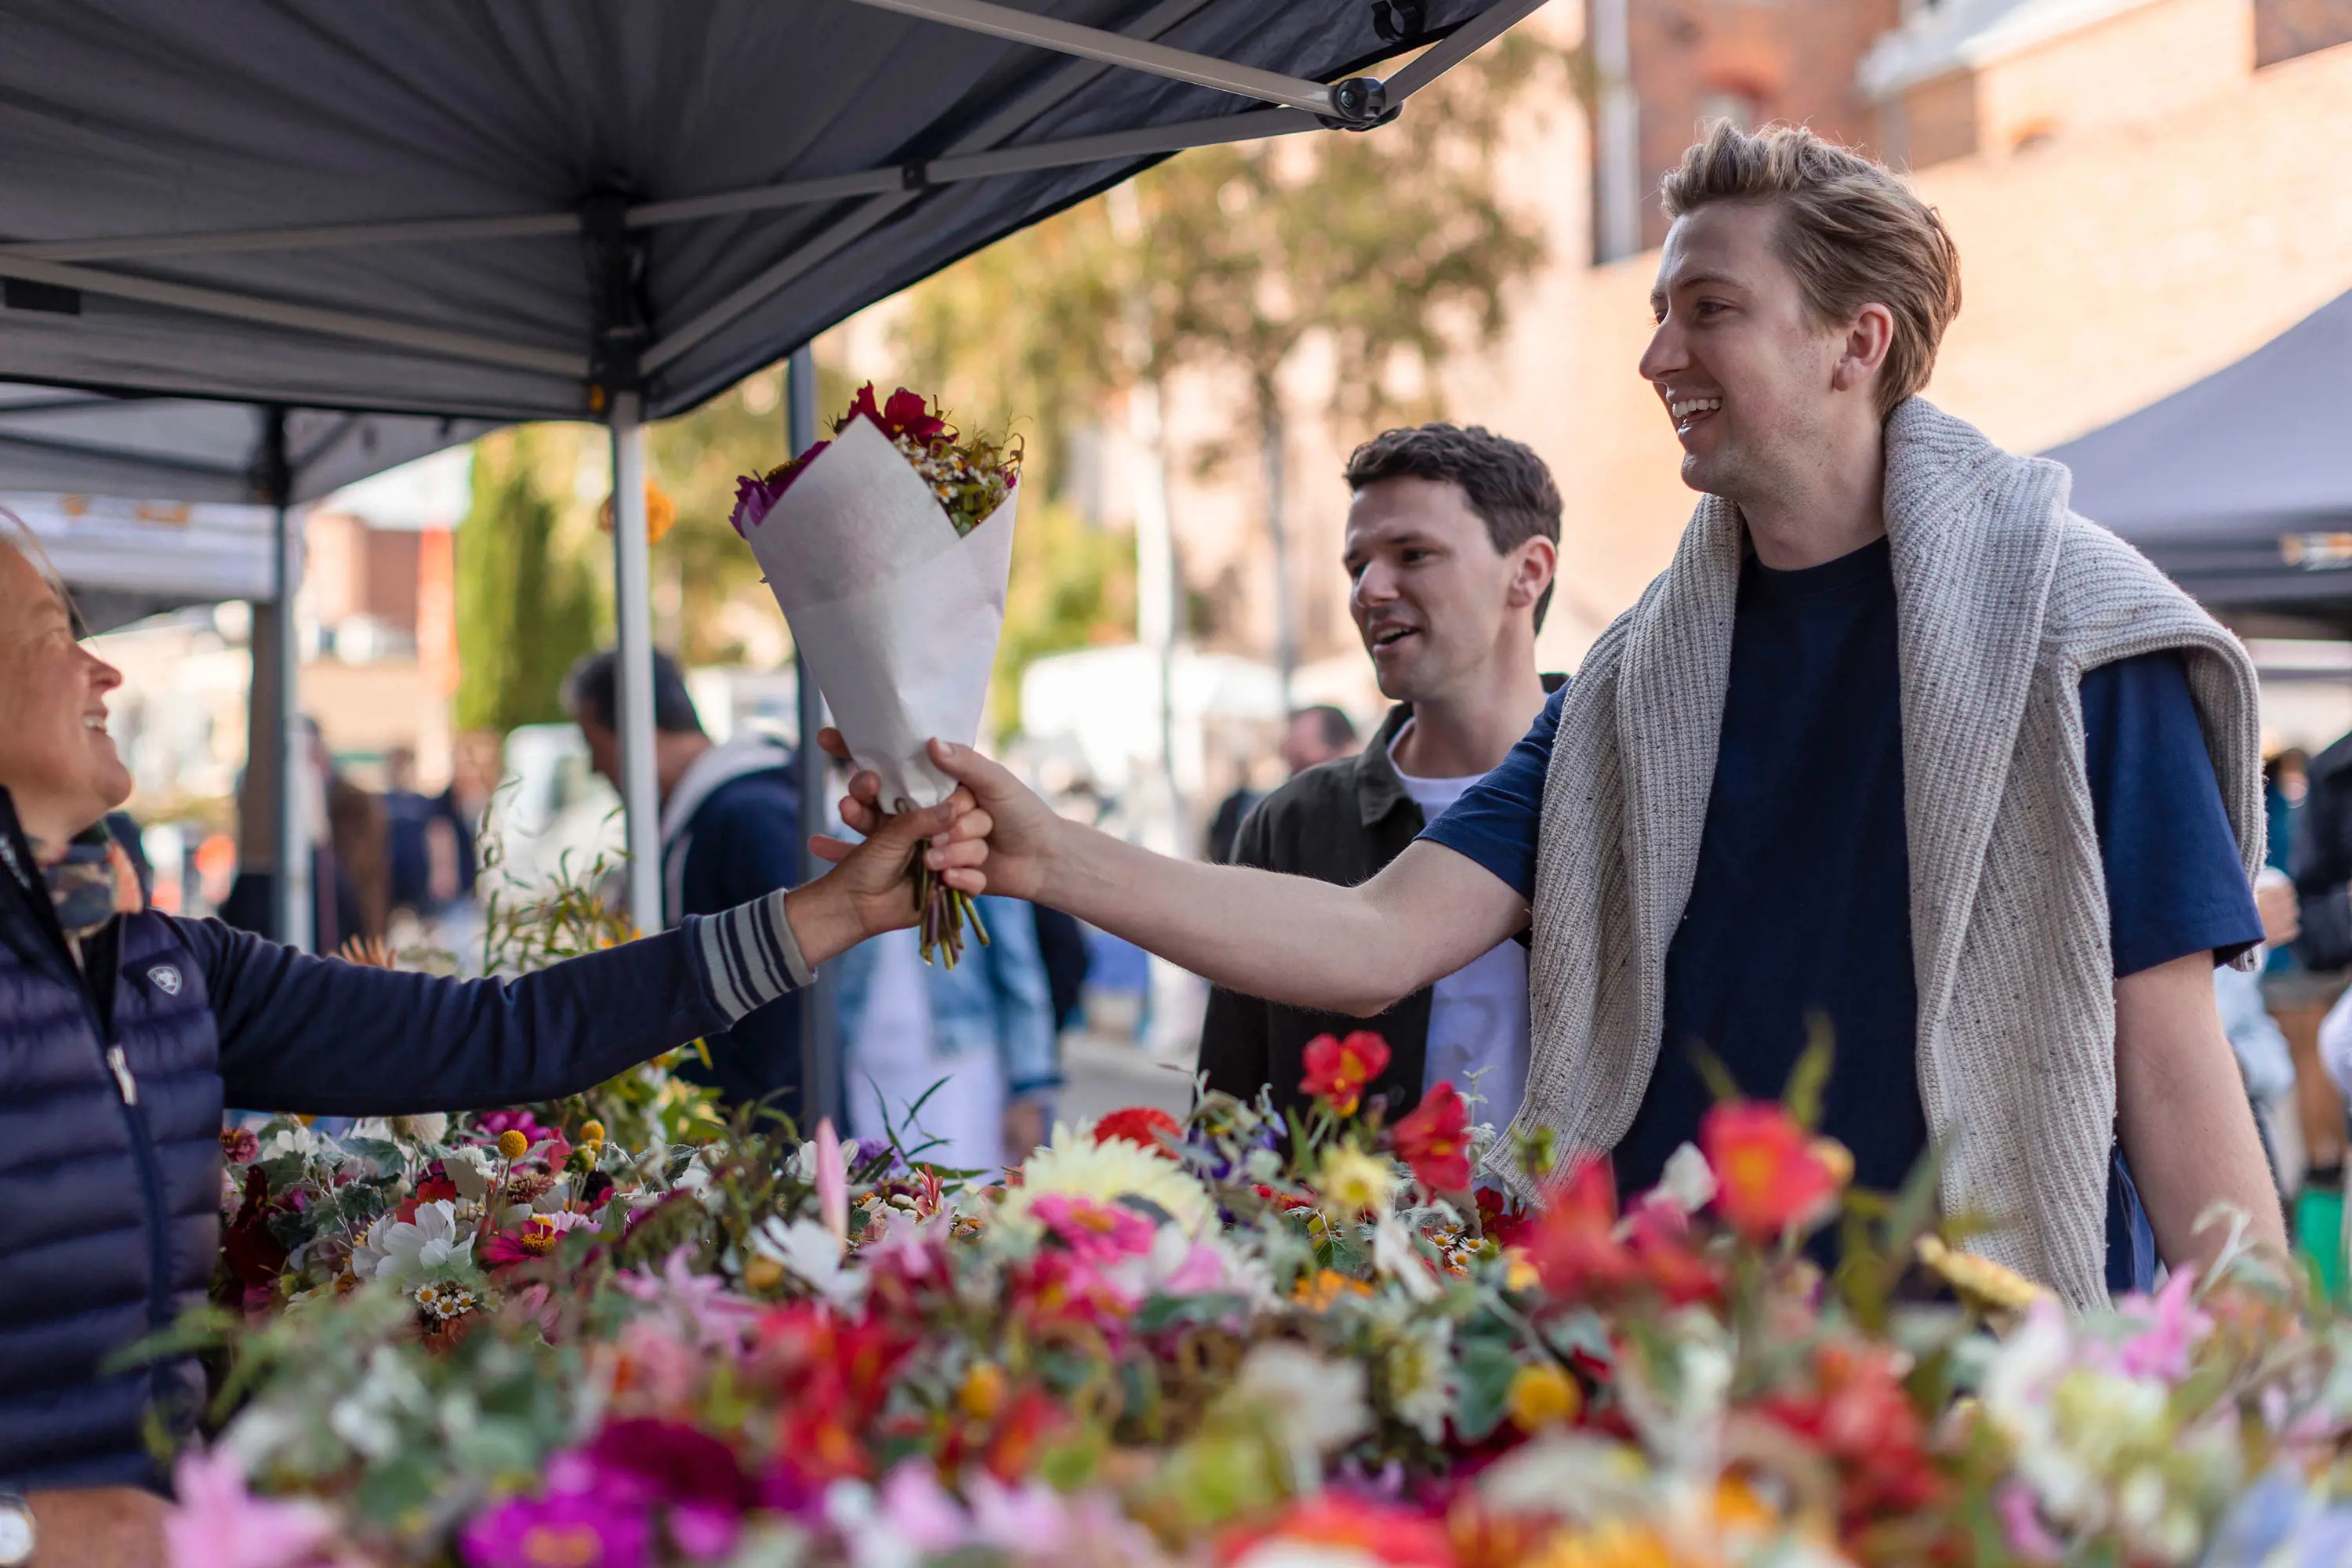 A man laughs with a stall holder while buying a large bouquet of flowers.